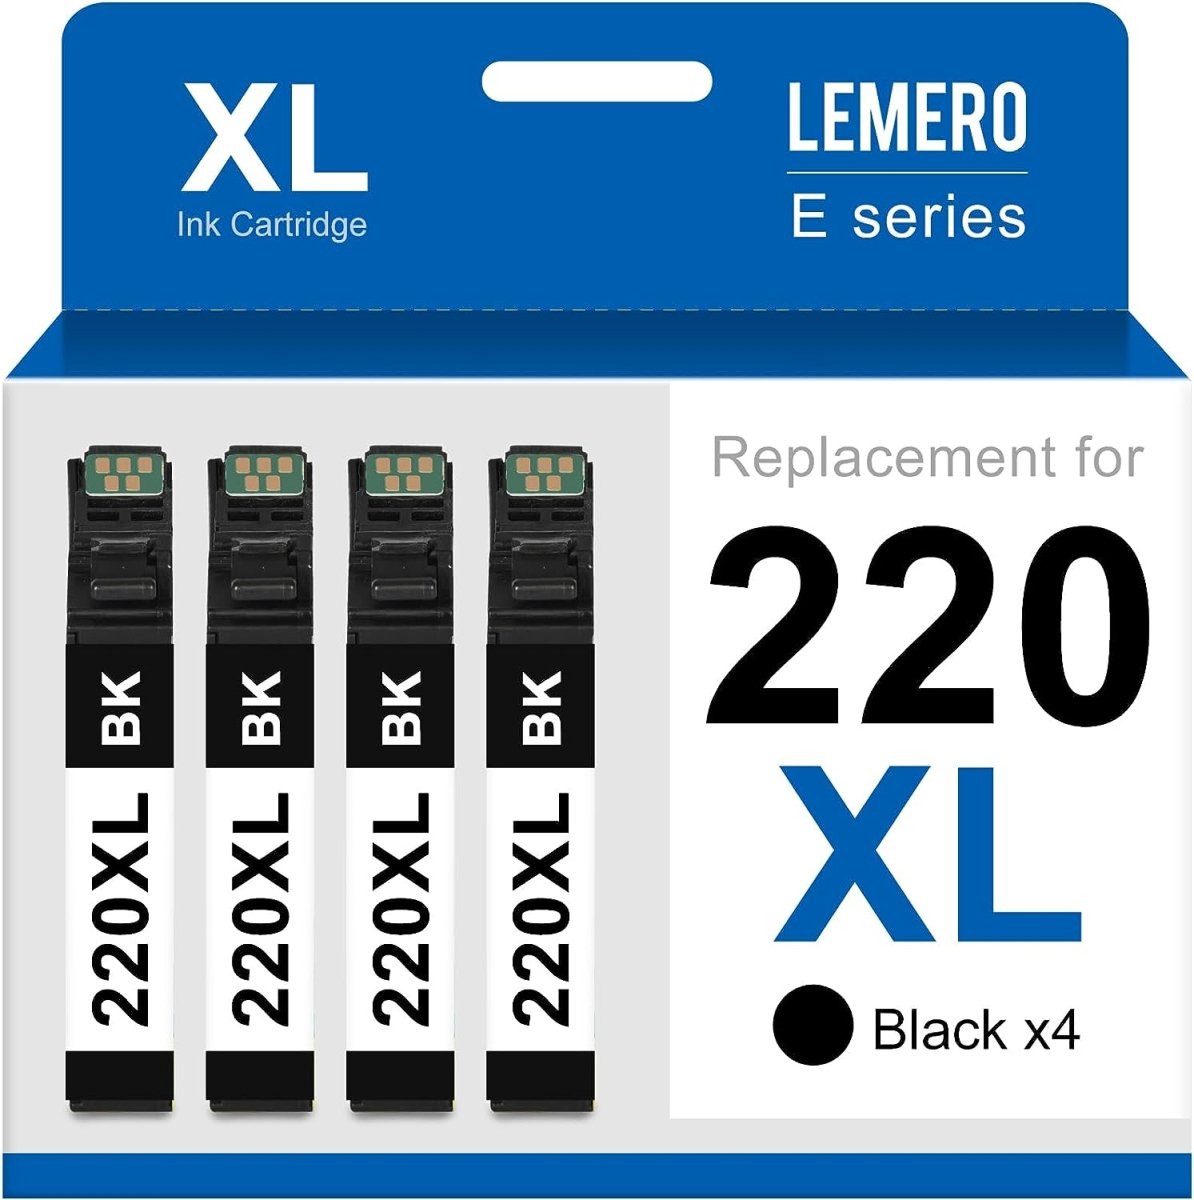 Epson 220XL Black Ink Cartridges High Capacity Remanufactured 4 Pack LRMERO